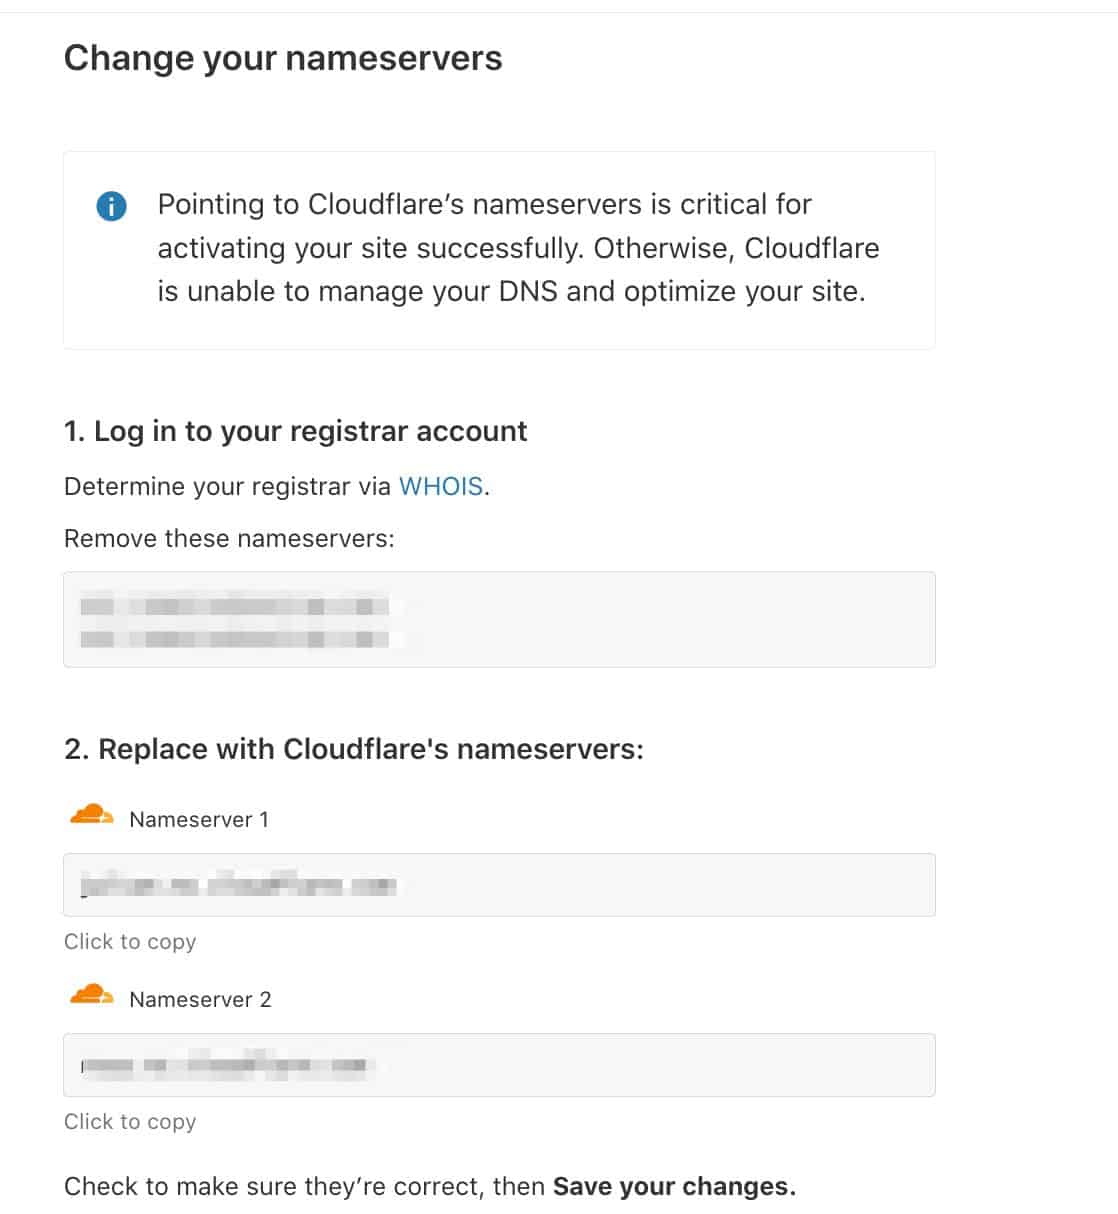 Cloudflare's instructions to change your nameservers